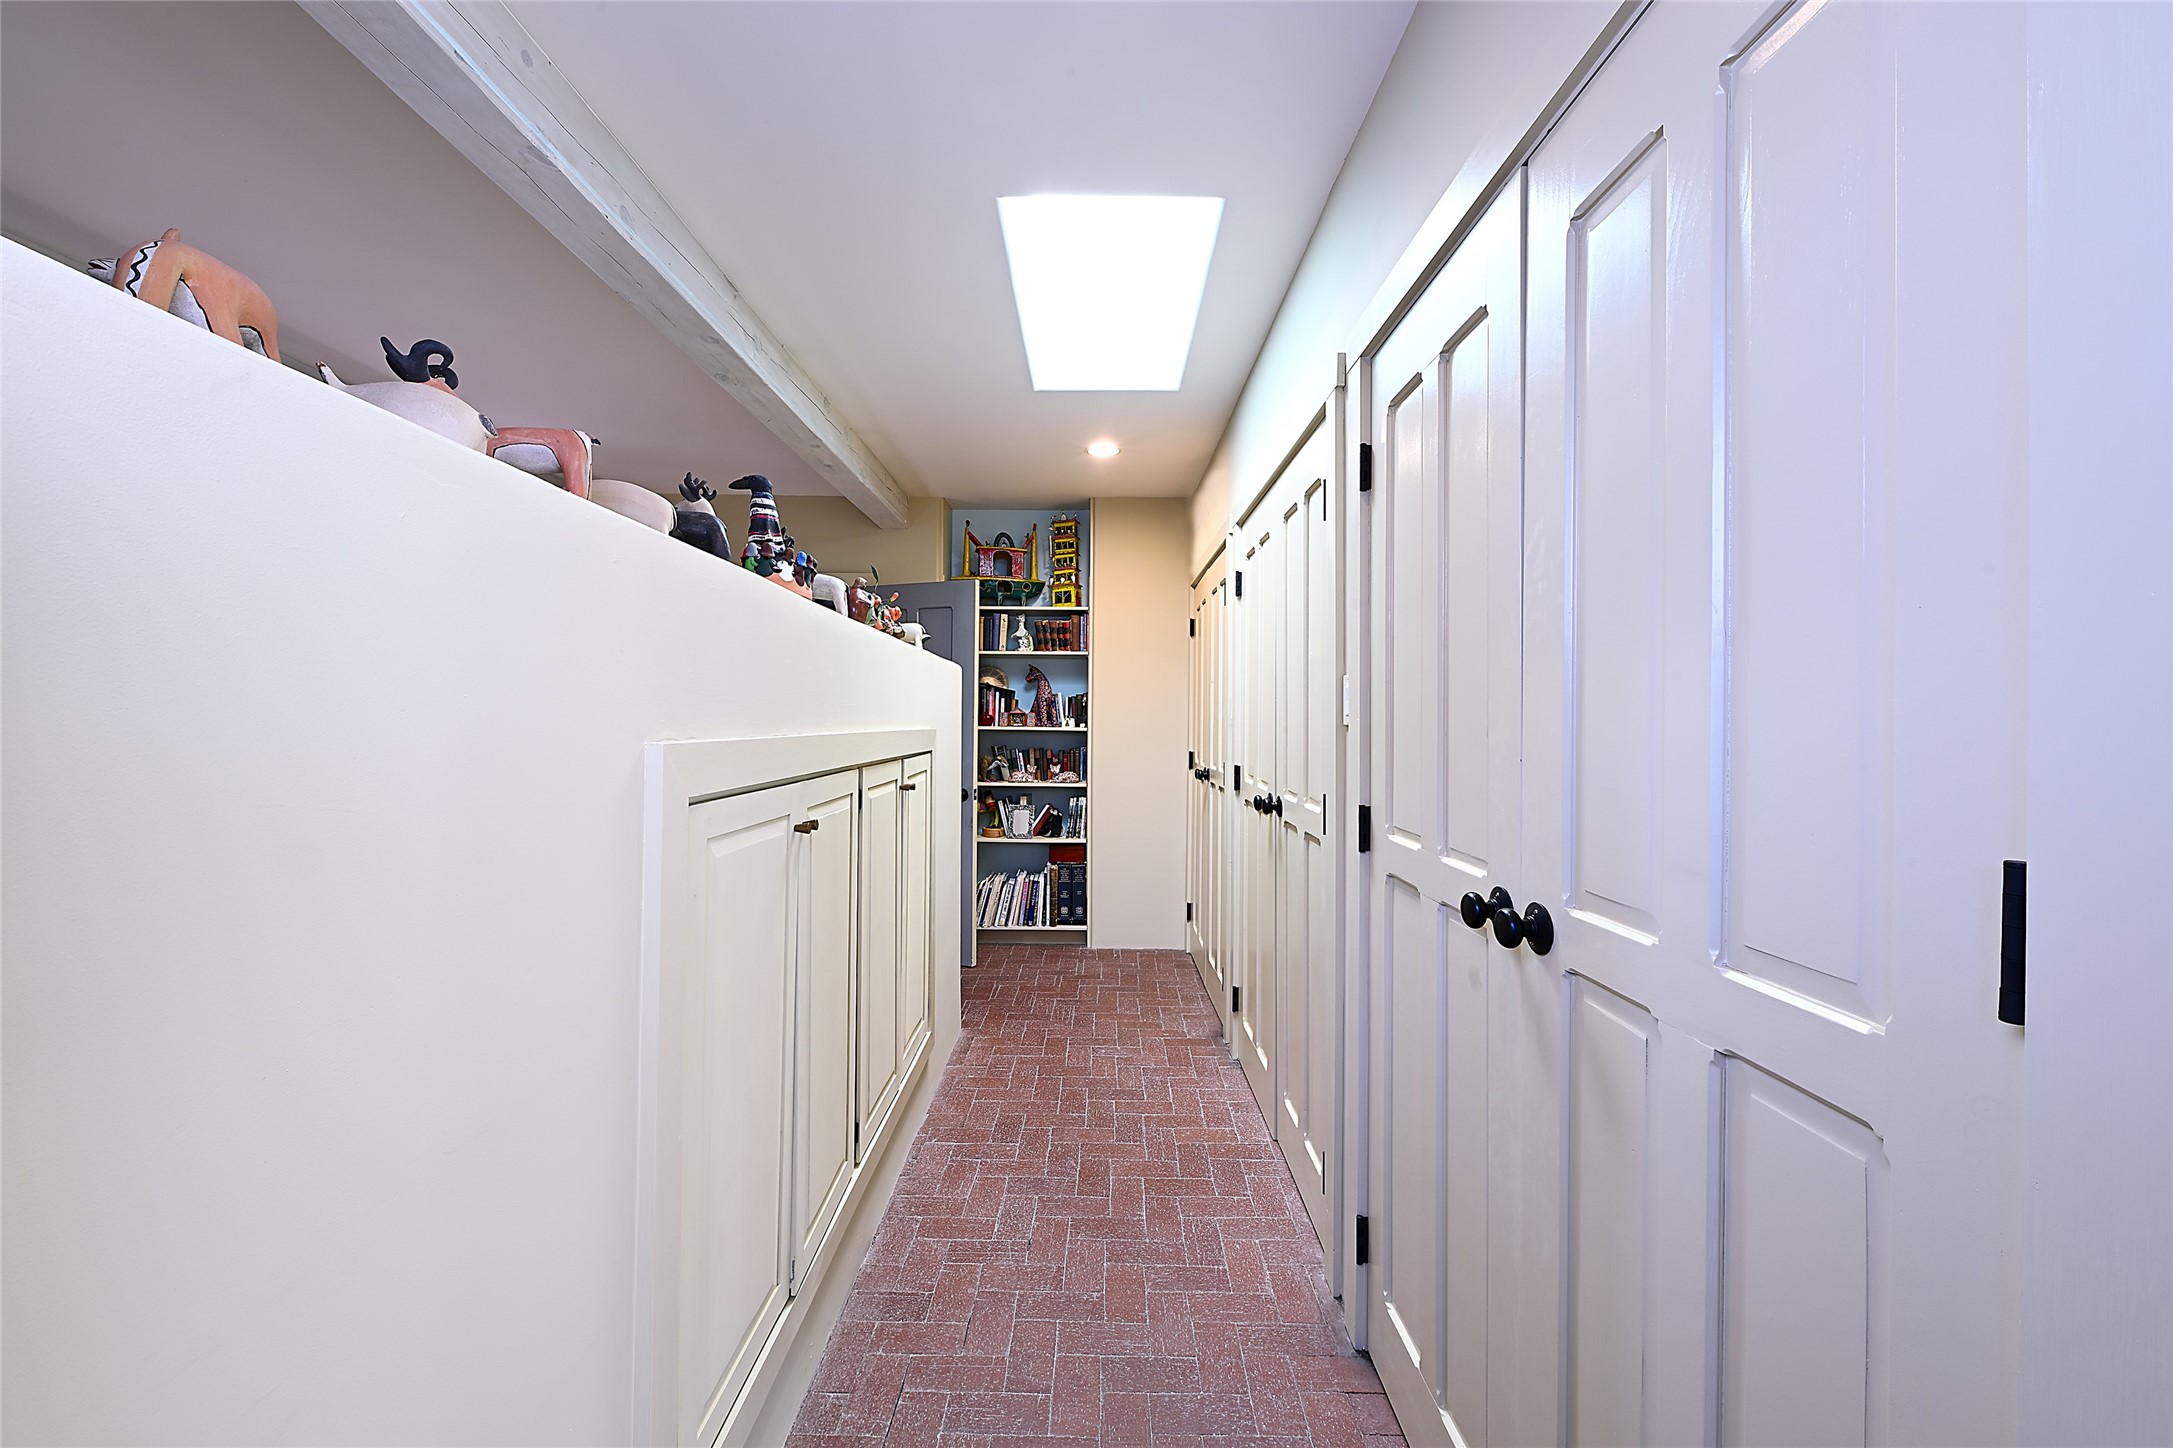 Along the back wall are several useful closets, while another wall is dedicated to built-in bookshelves.